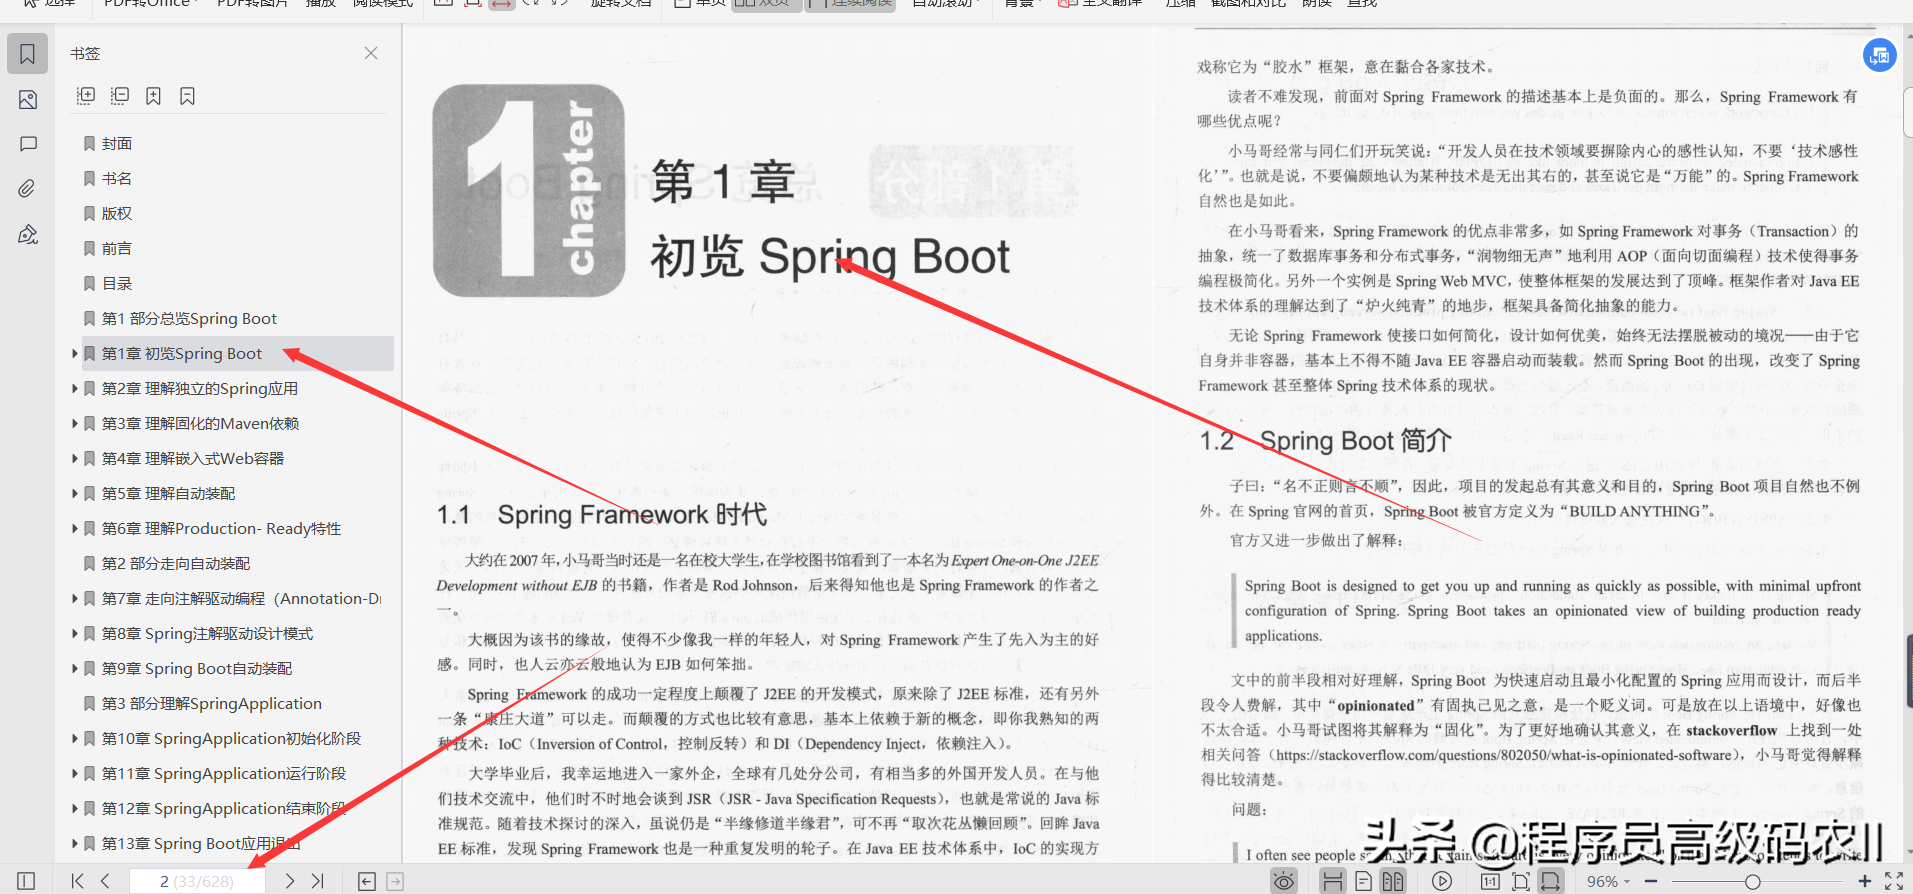 The 24-year-old Meituan 80W annual salary architect shares SprinBoot programming thought documents